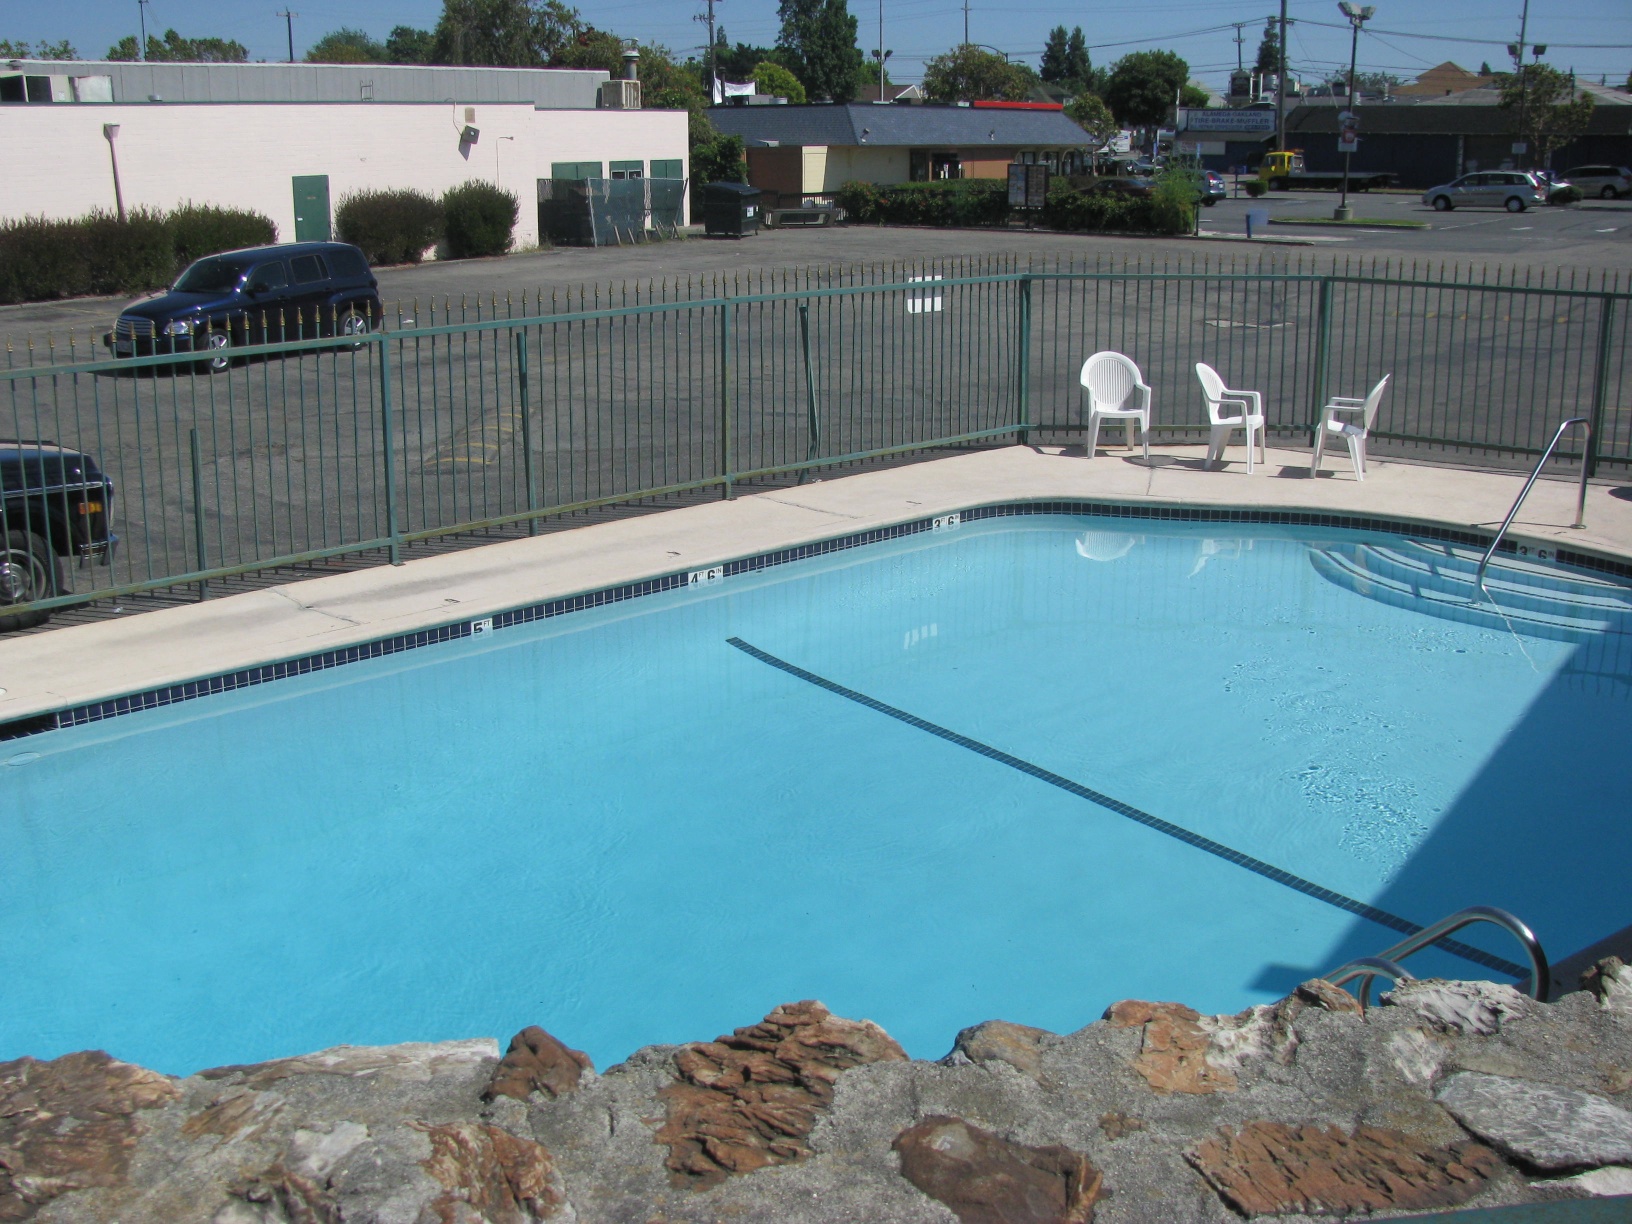 Our motel pool